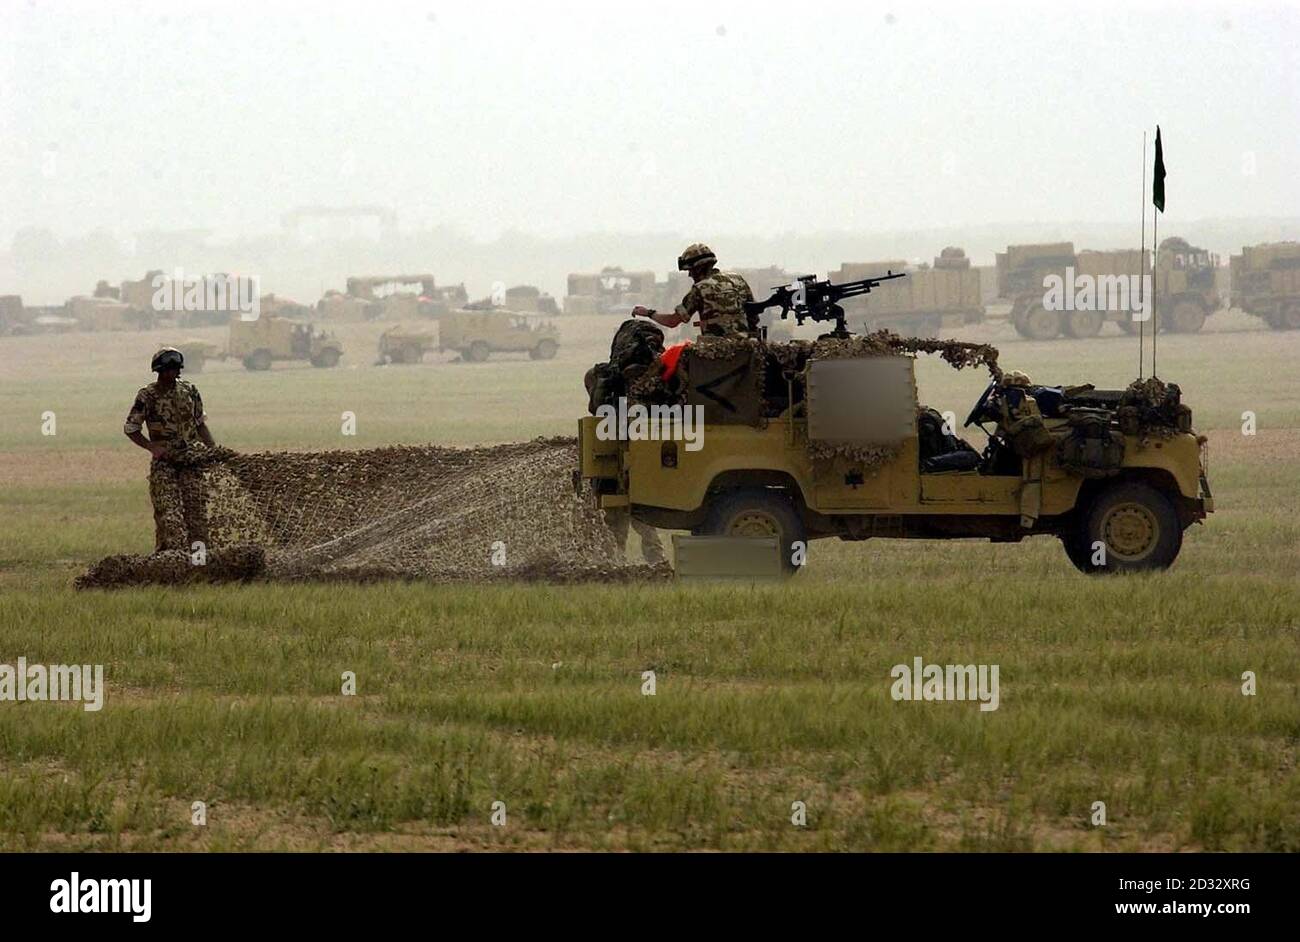 British troops from the 16 Air Assault Brigade prepare their vehicles and equipment as they gather close to the Iraqi border. Stock Photo